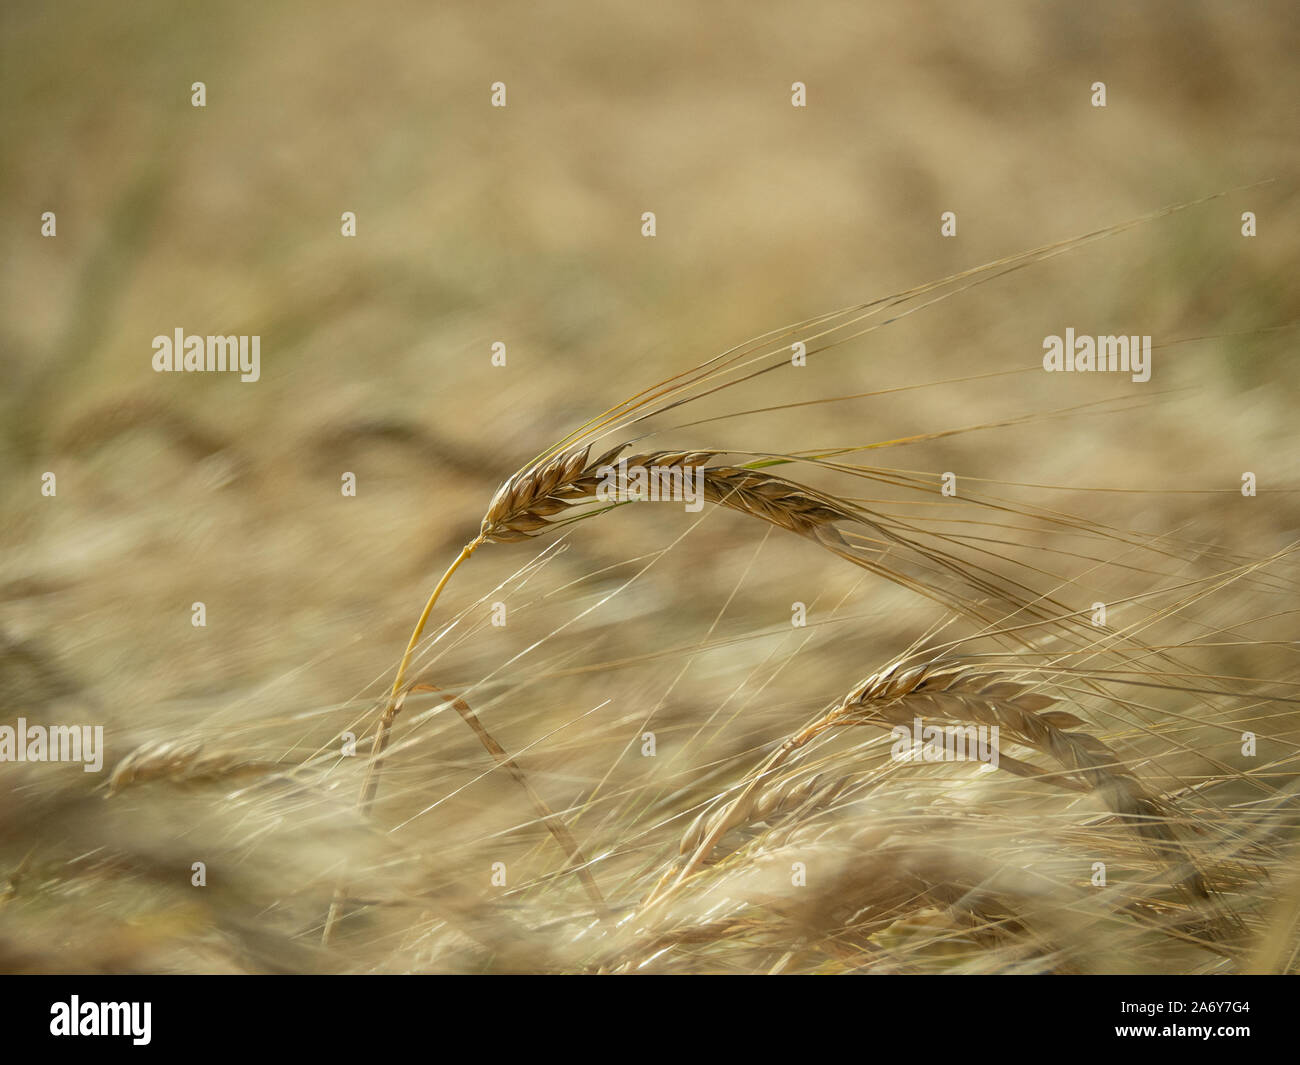 A single ripe barley ear picked out against the barley field Stock Photo